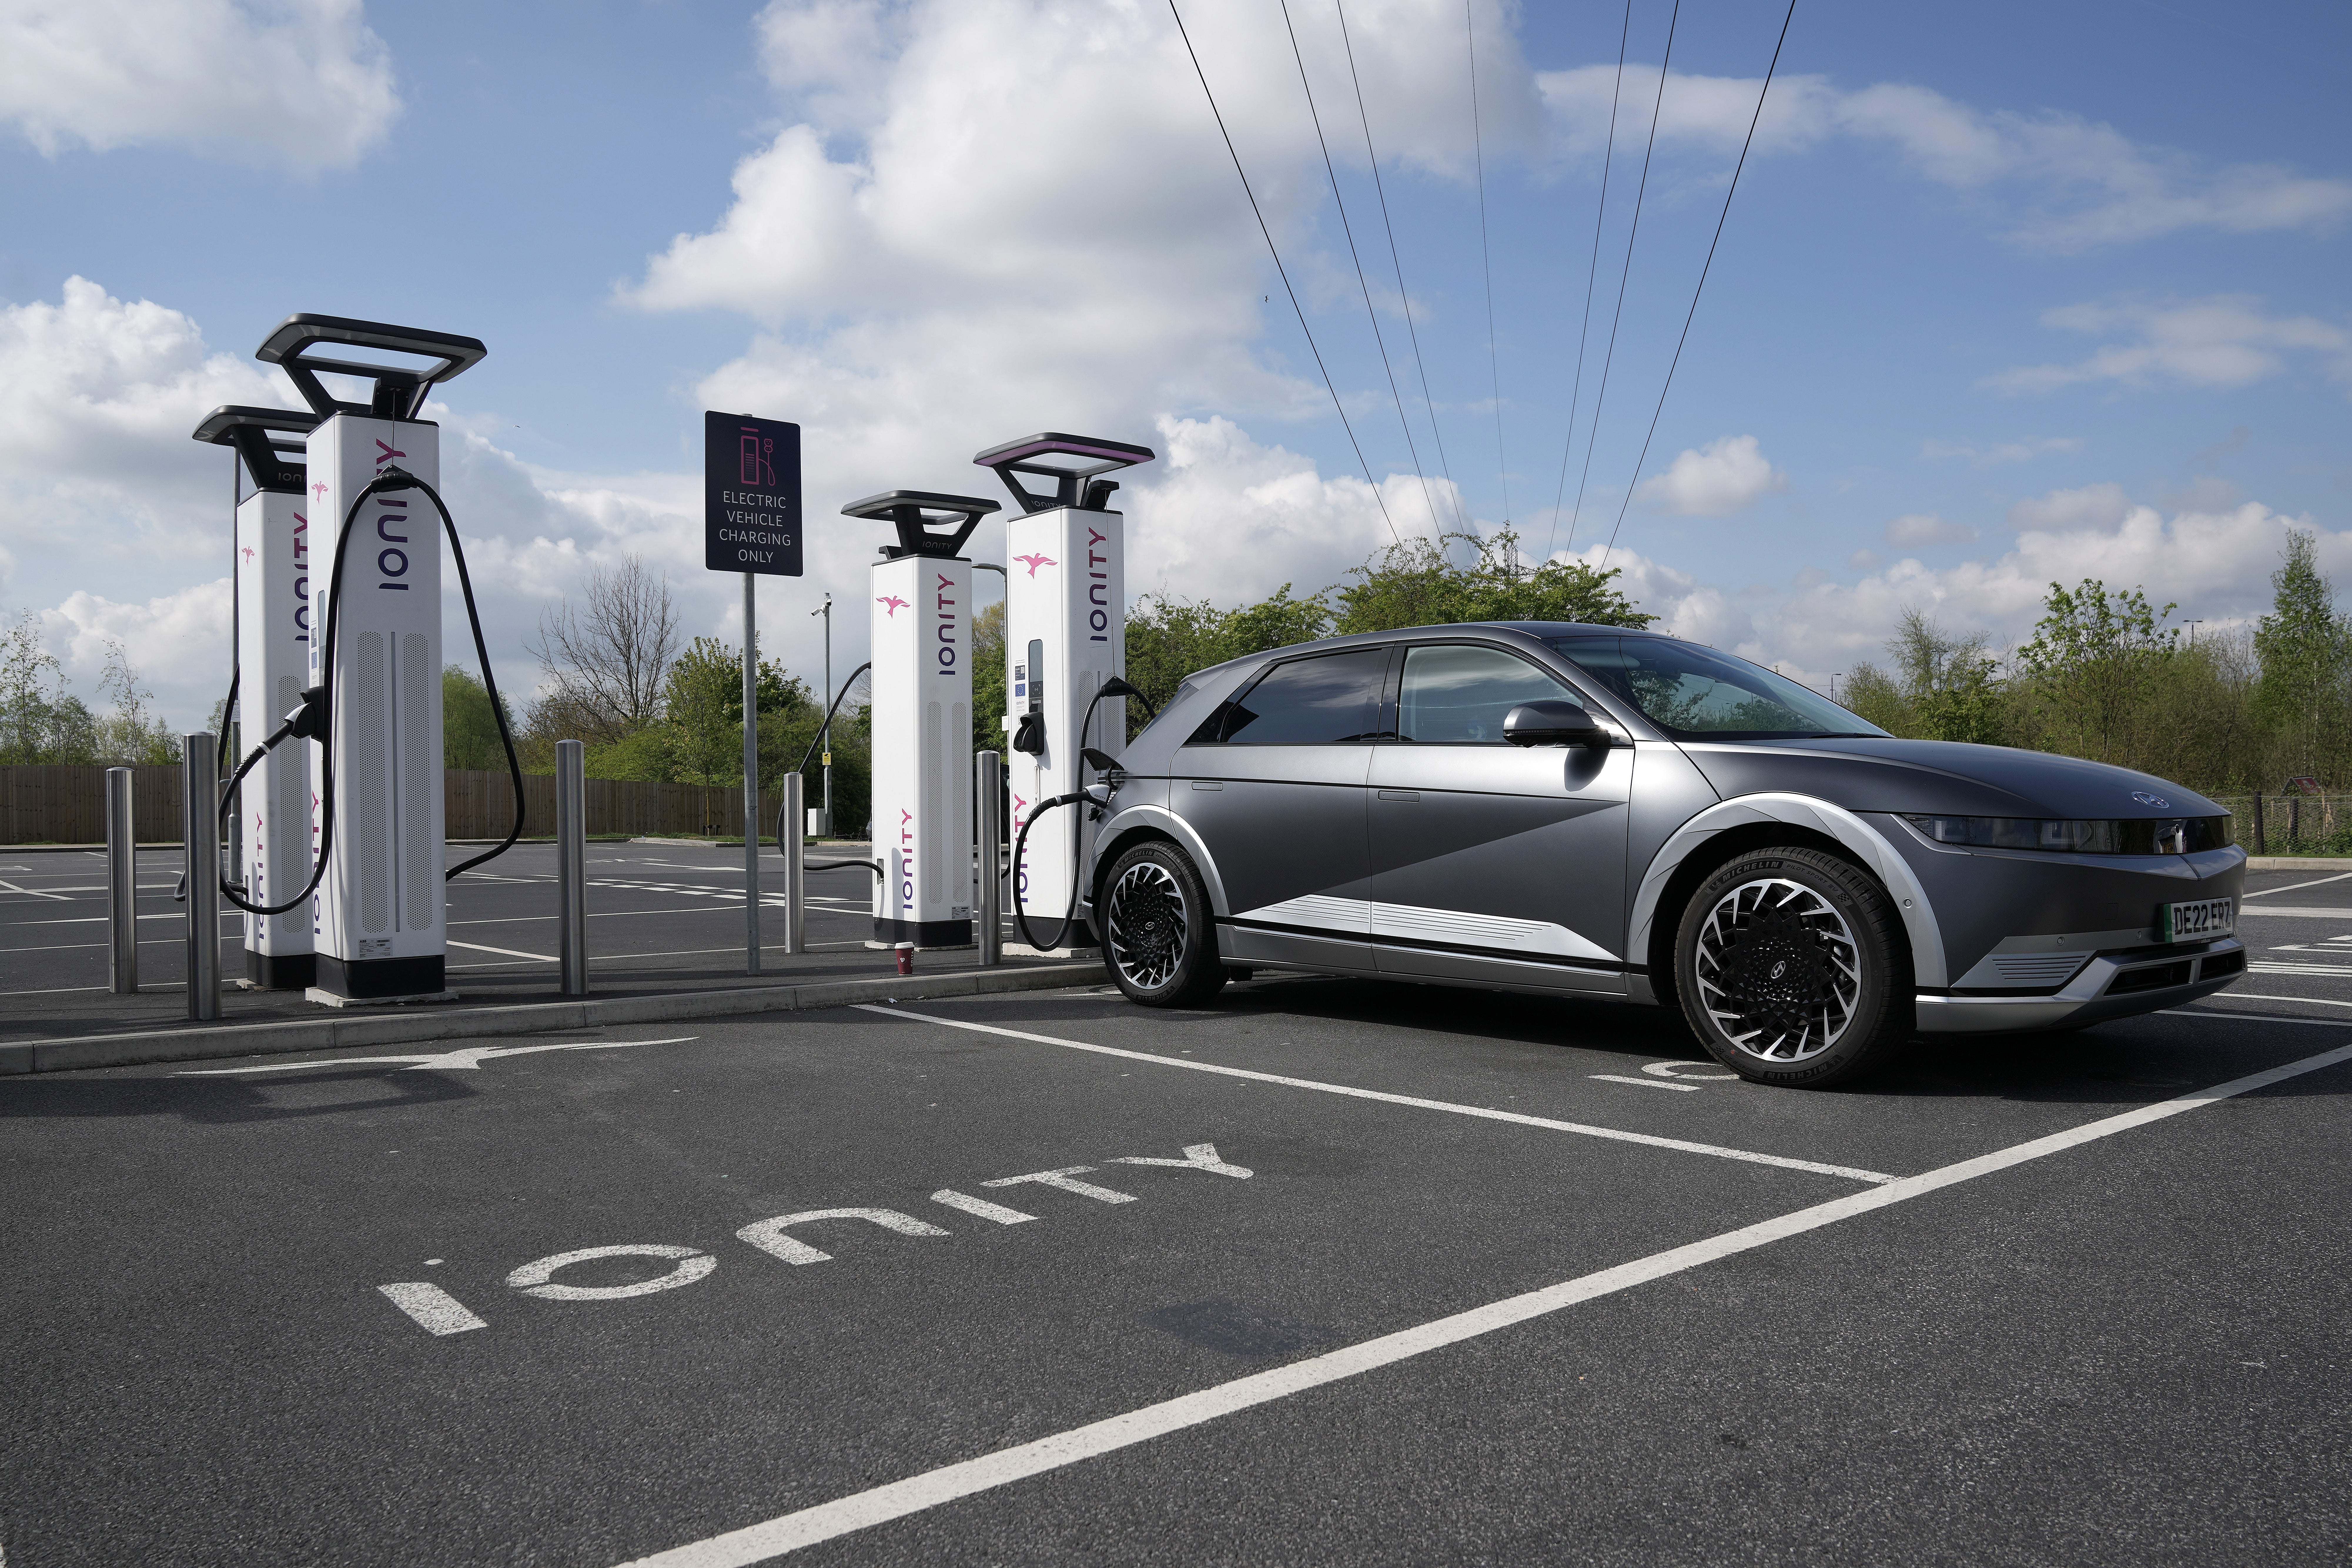 New analysis shows only 39 per cent of 119 motorway service areas have hit the target number of chargers